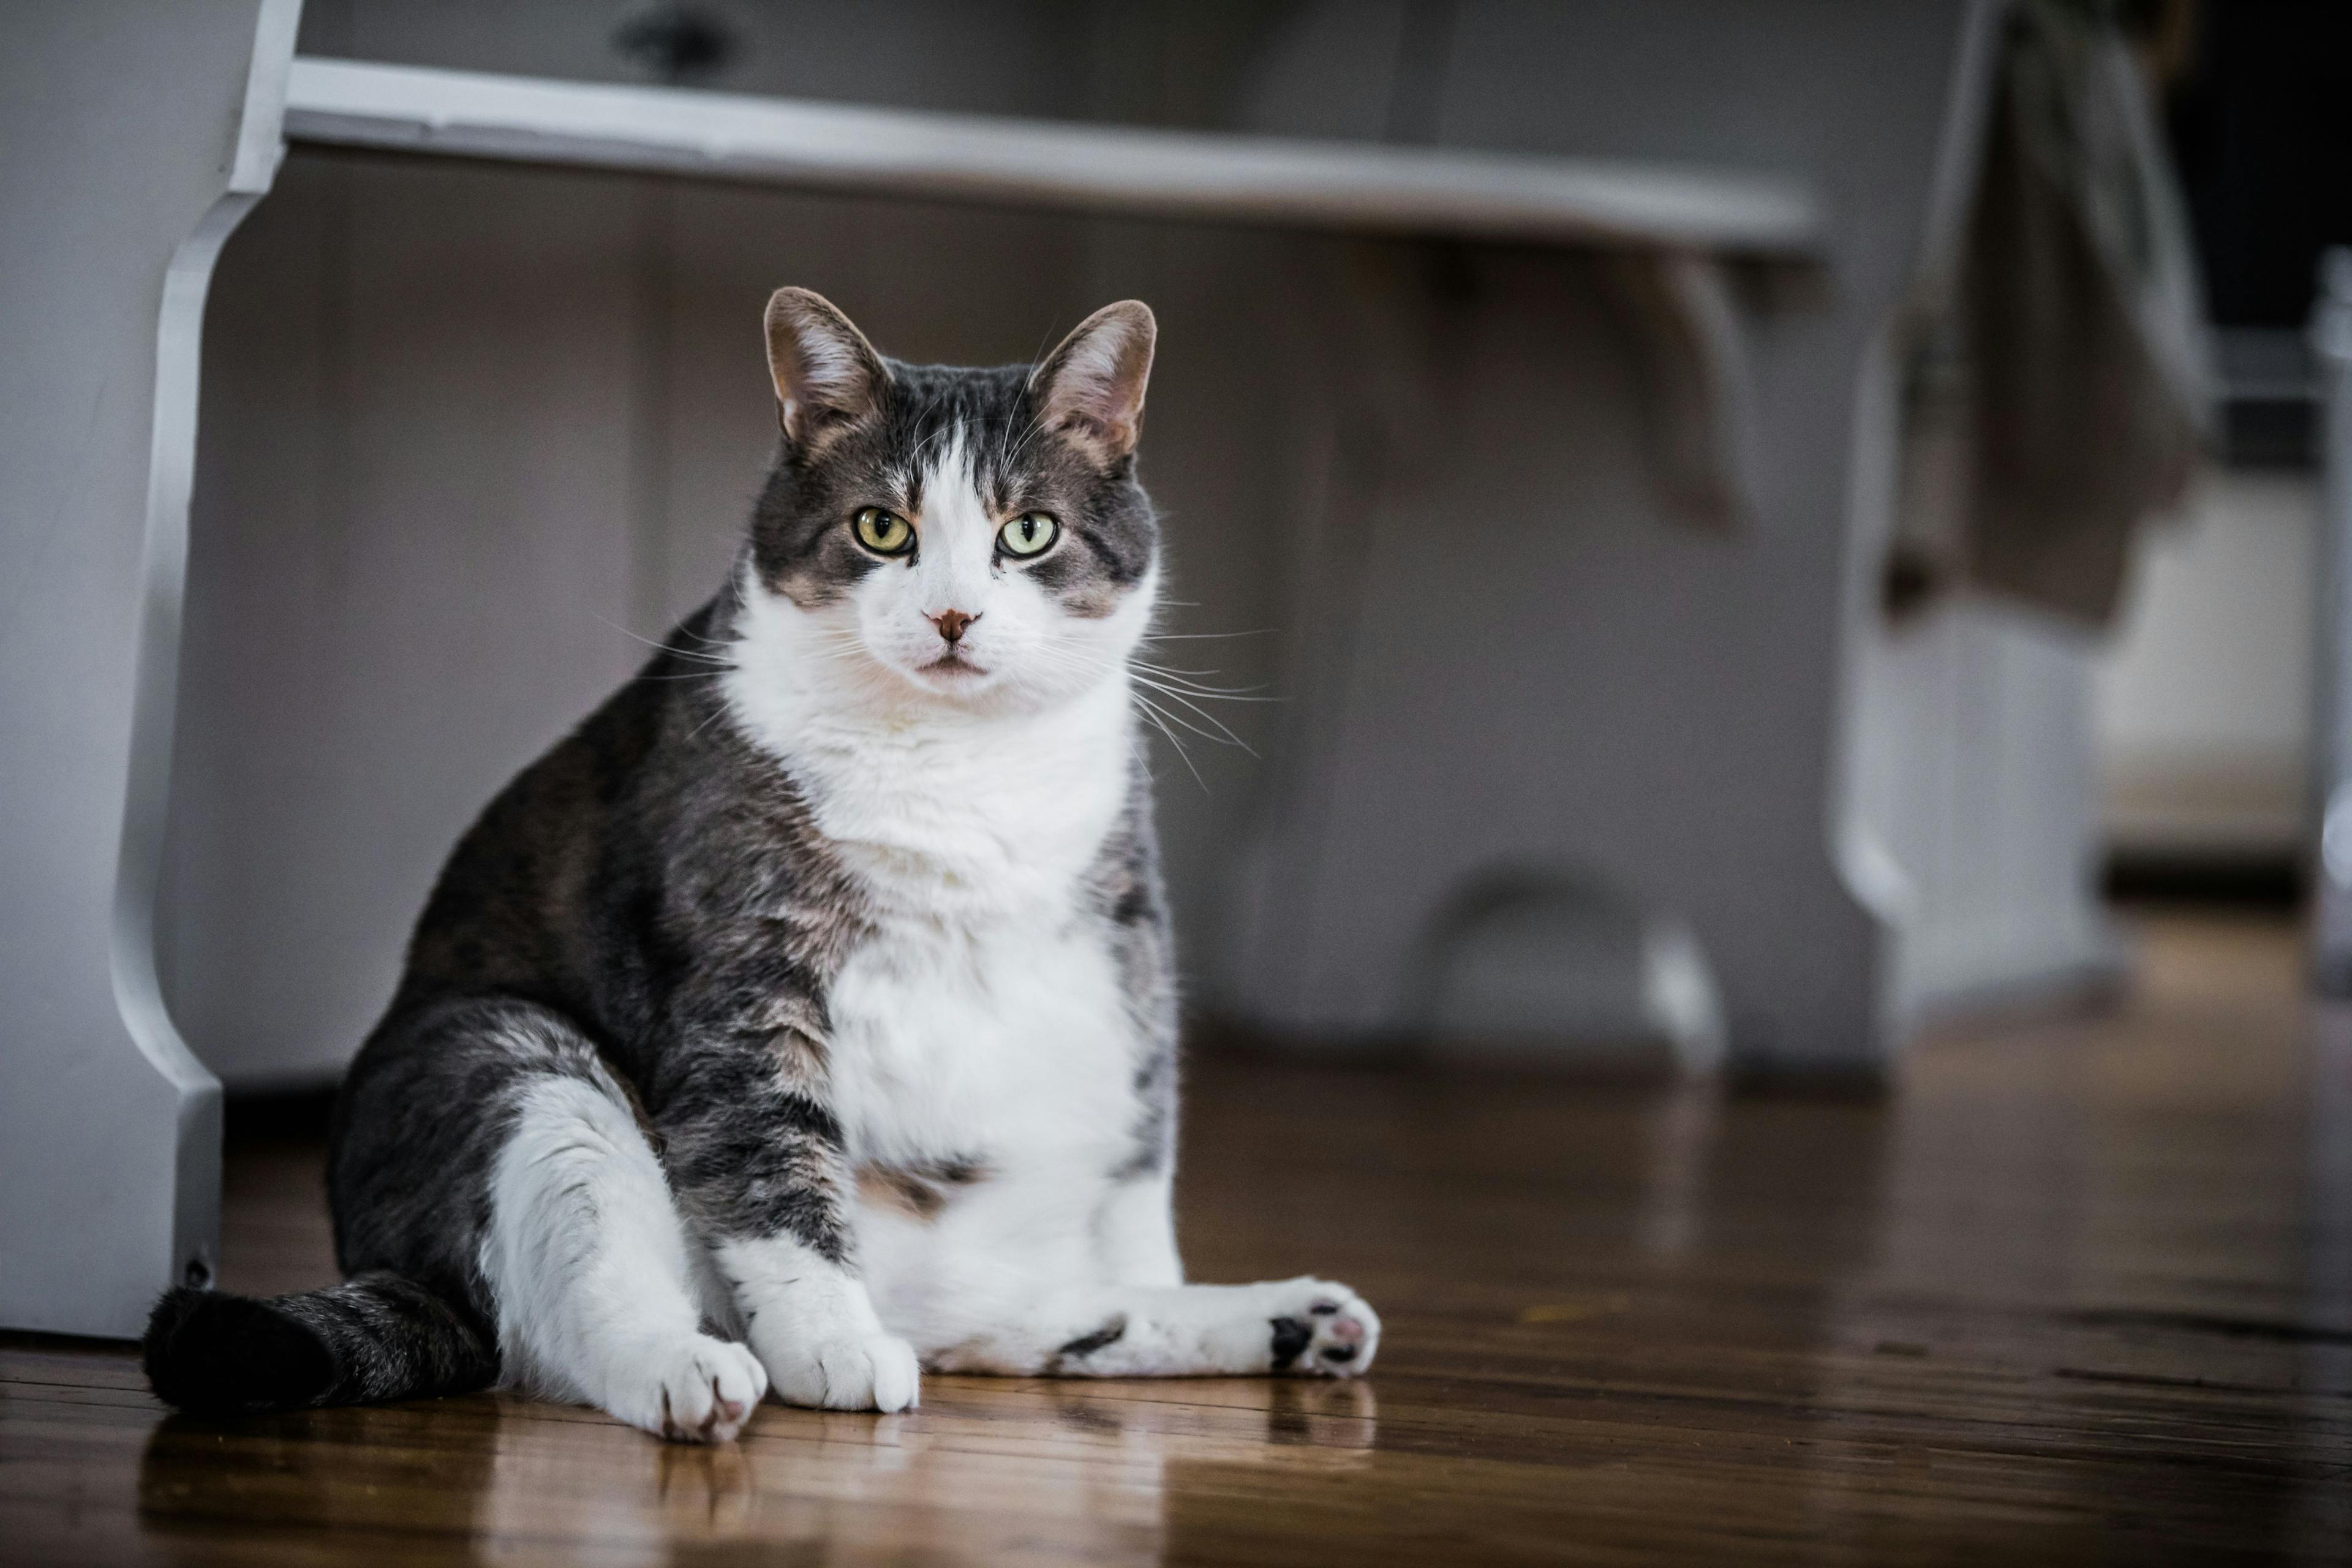 Obese cat sitting down